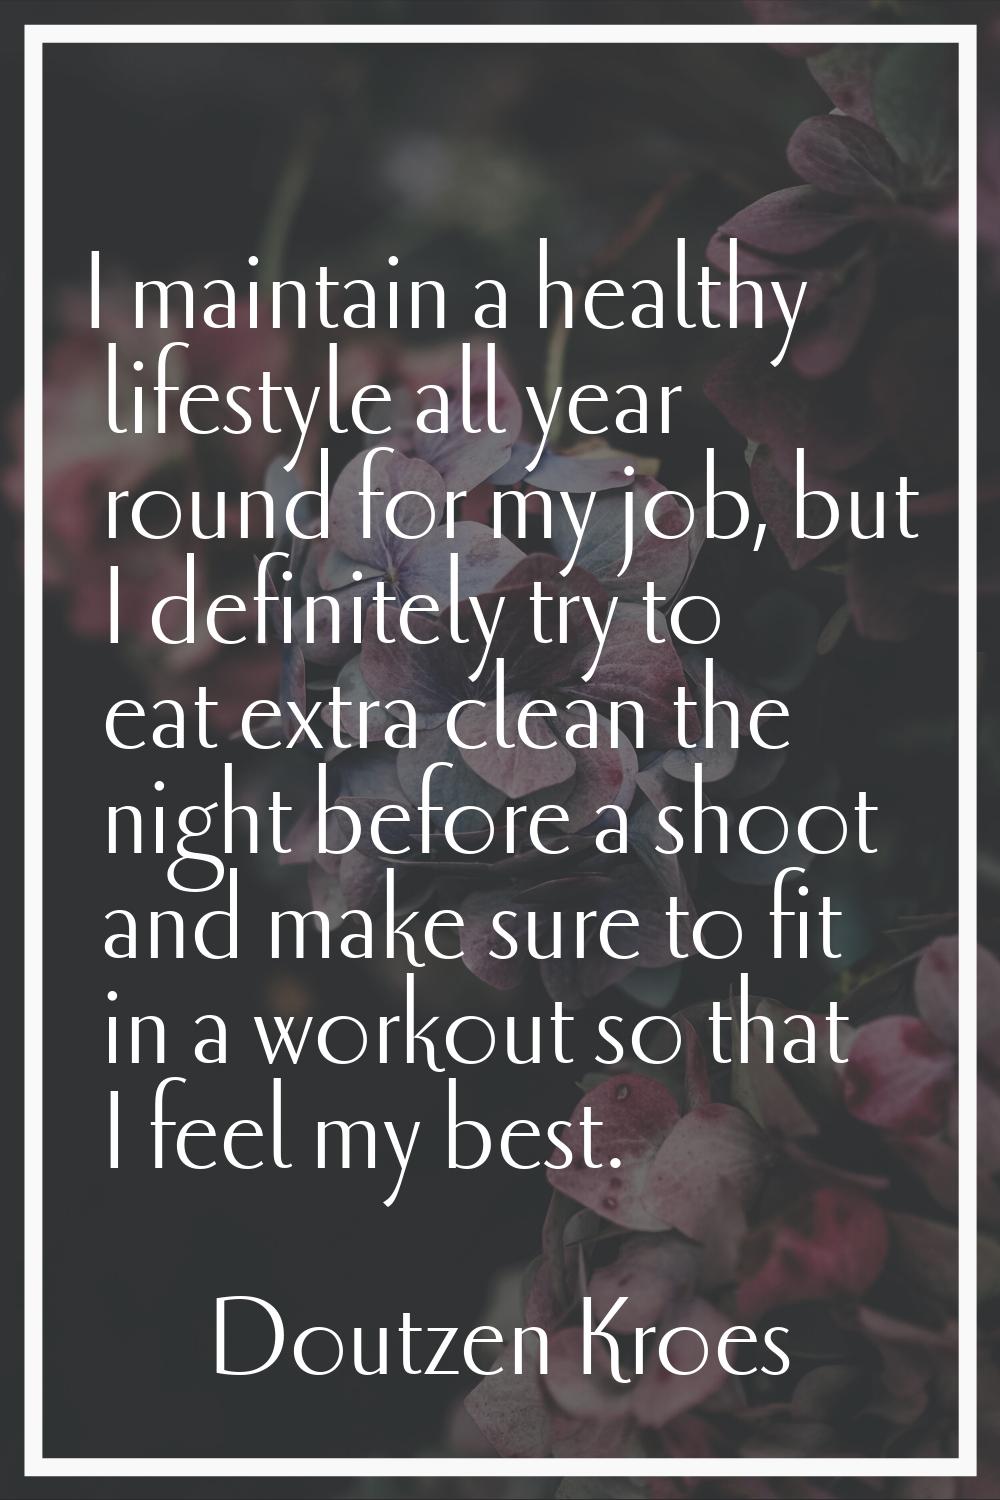 I maintain a healthy lifestyle all year round for my job, but I definitely try to eat extra clean t